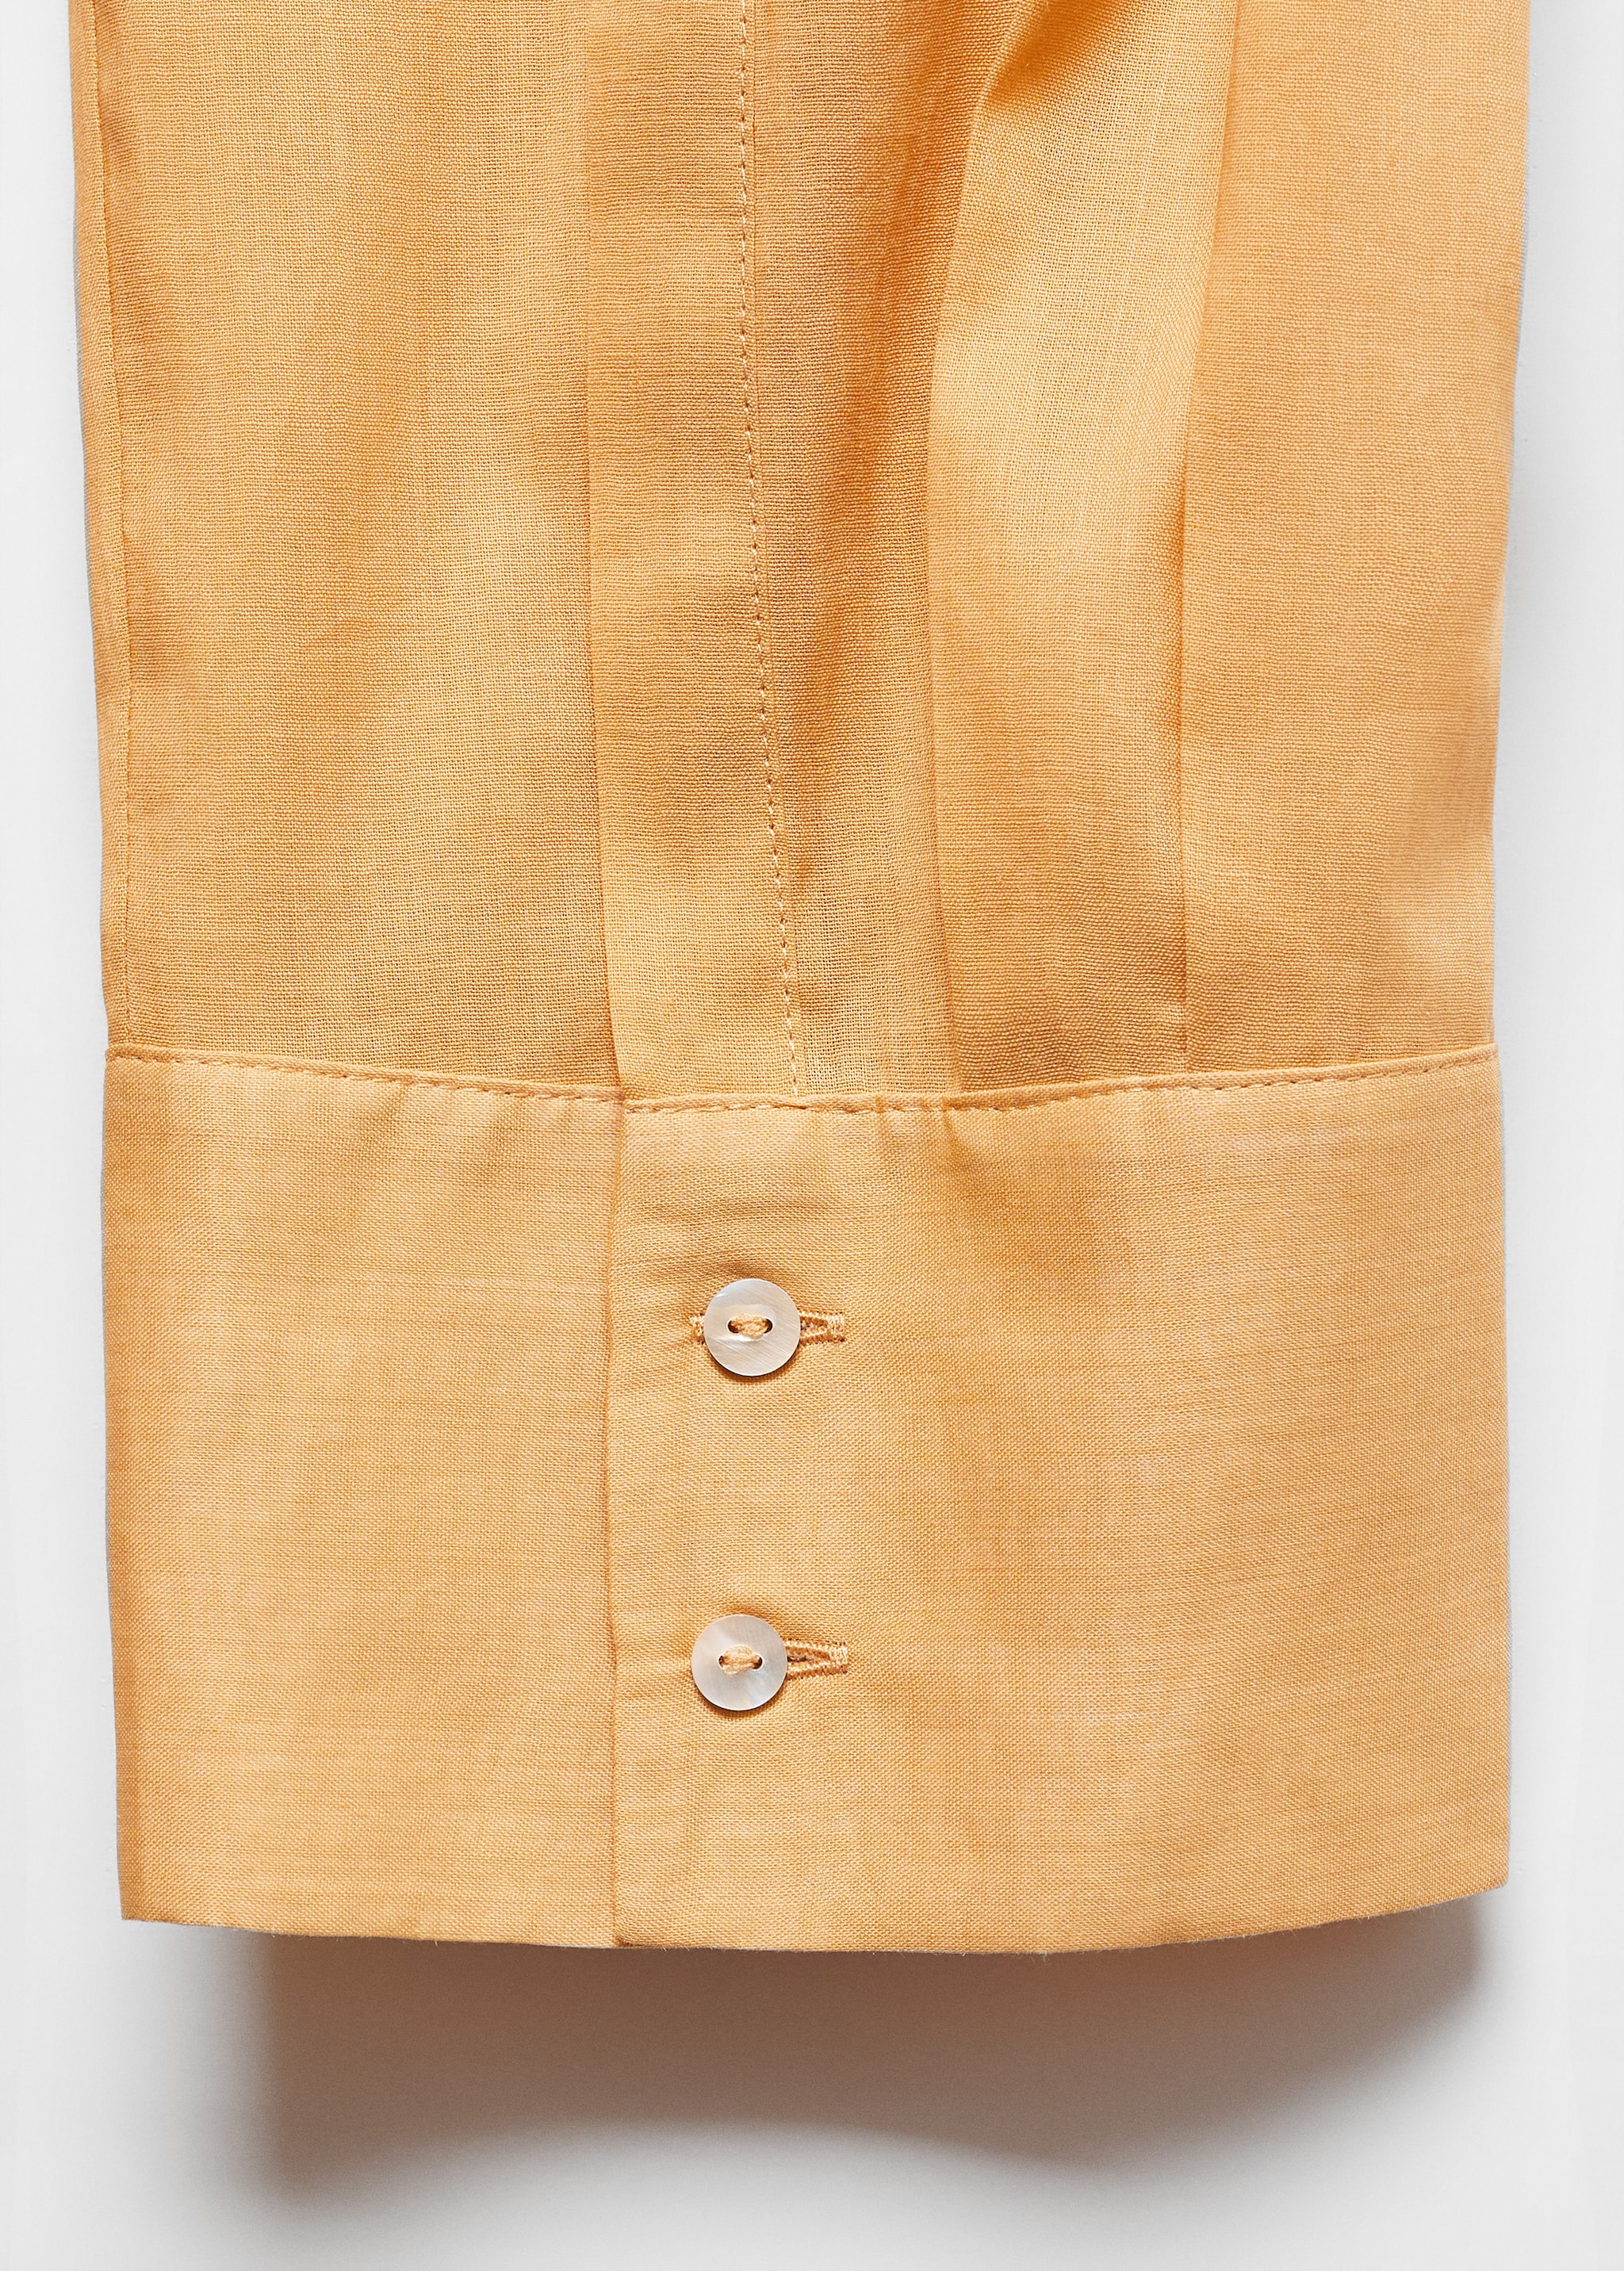 Ramie shirt with pockets - Details of the article 8